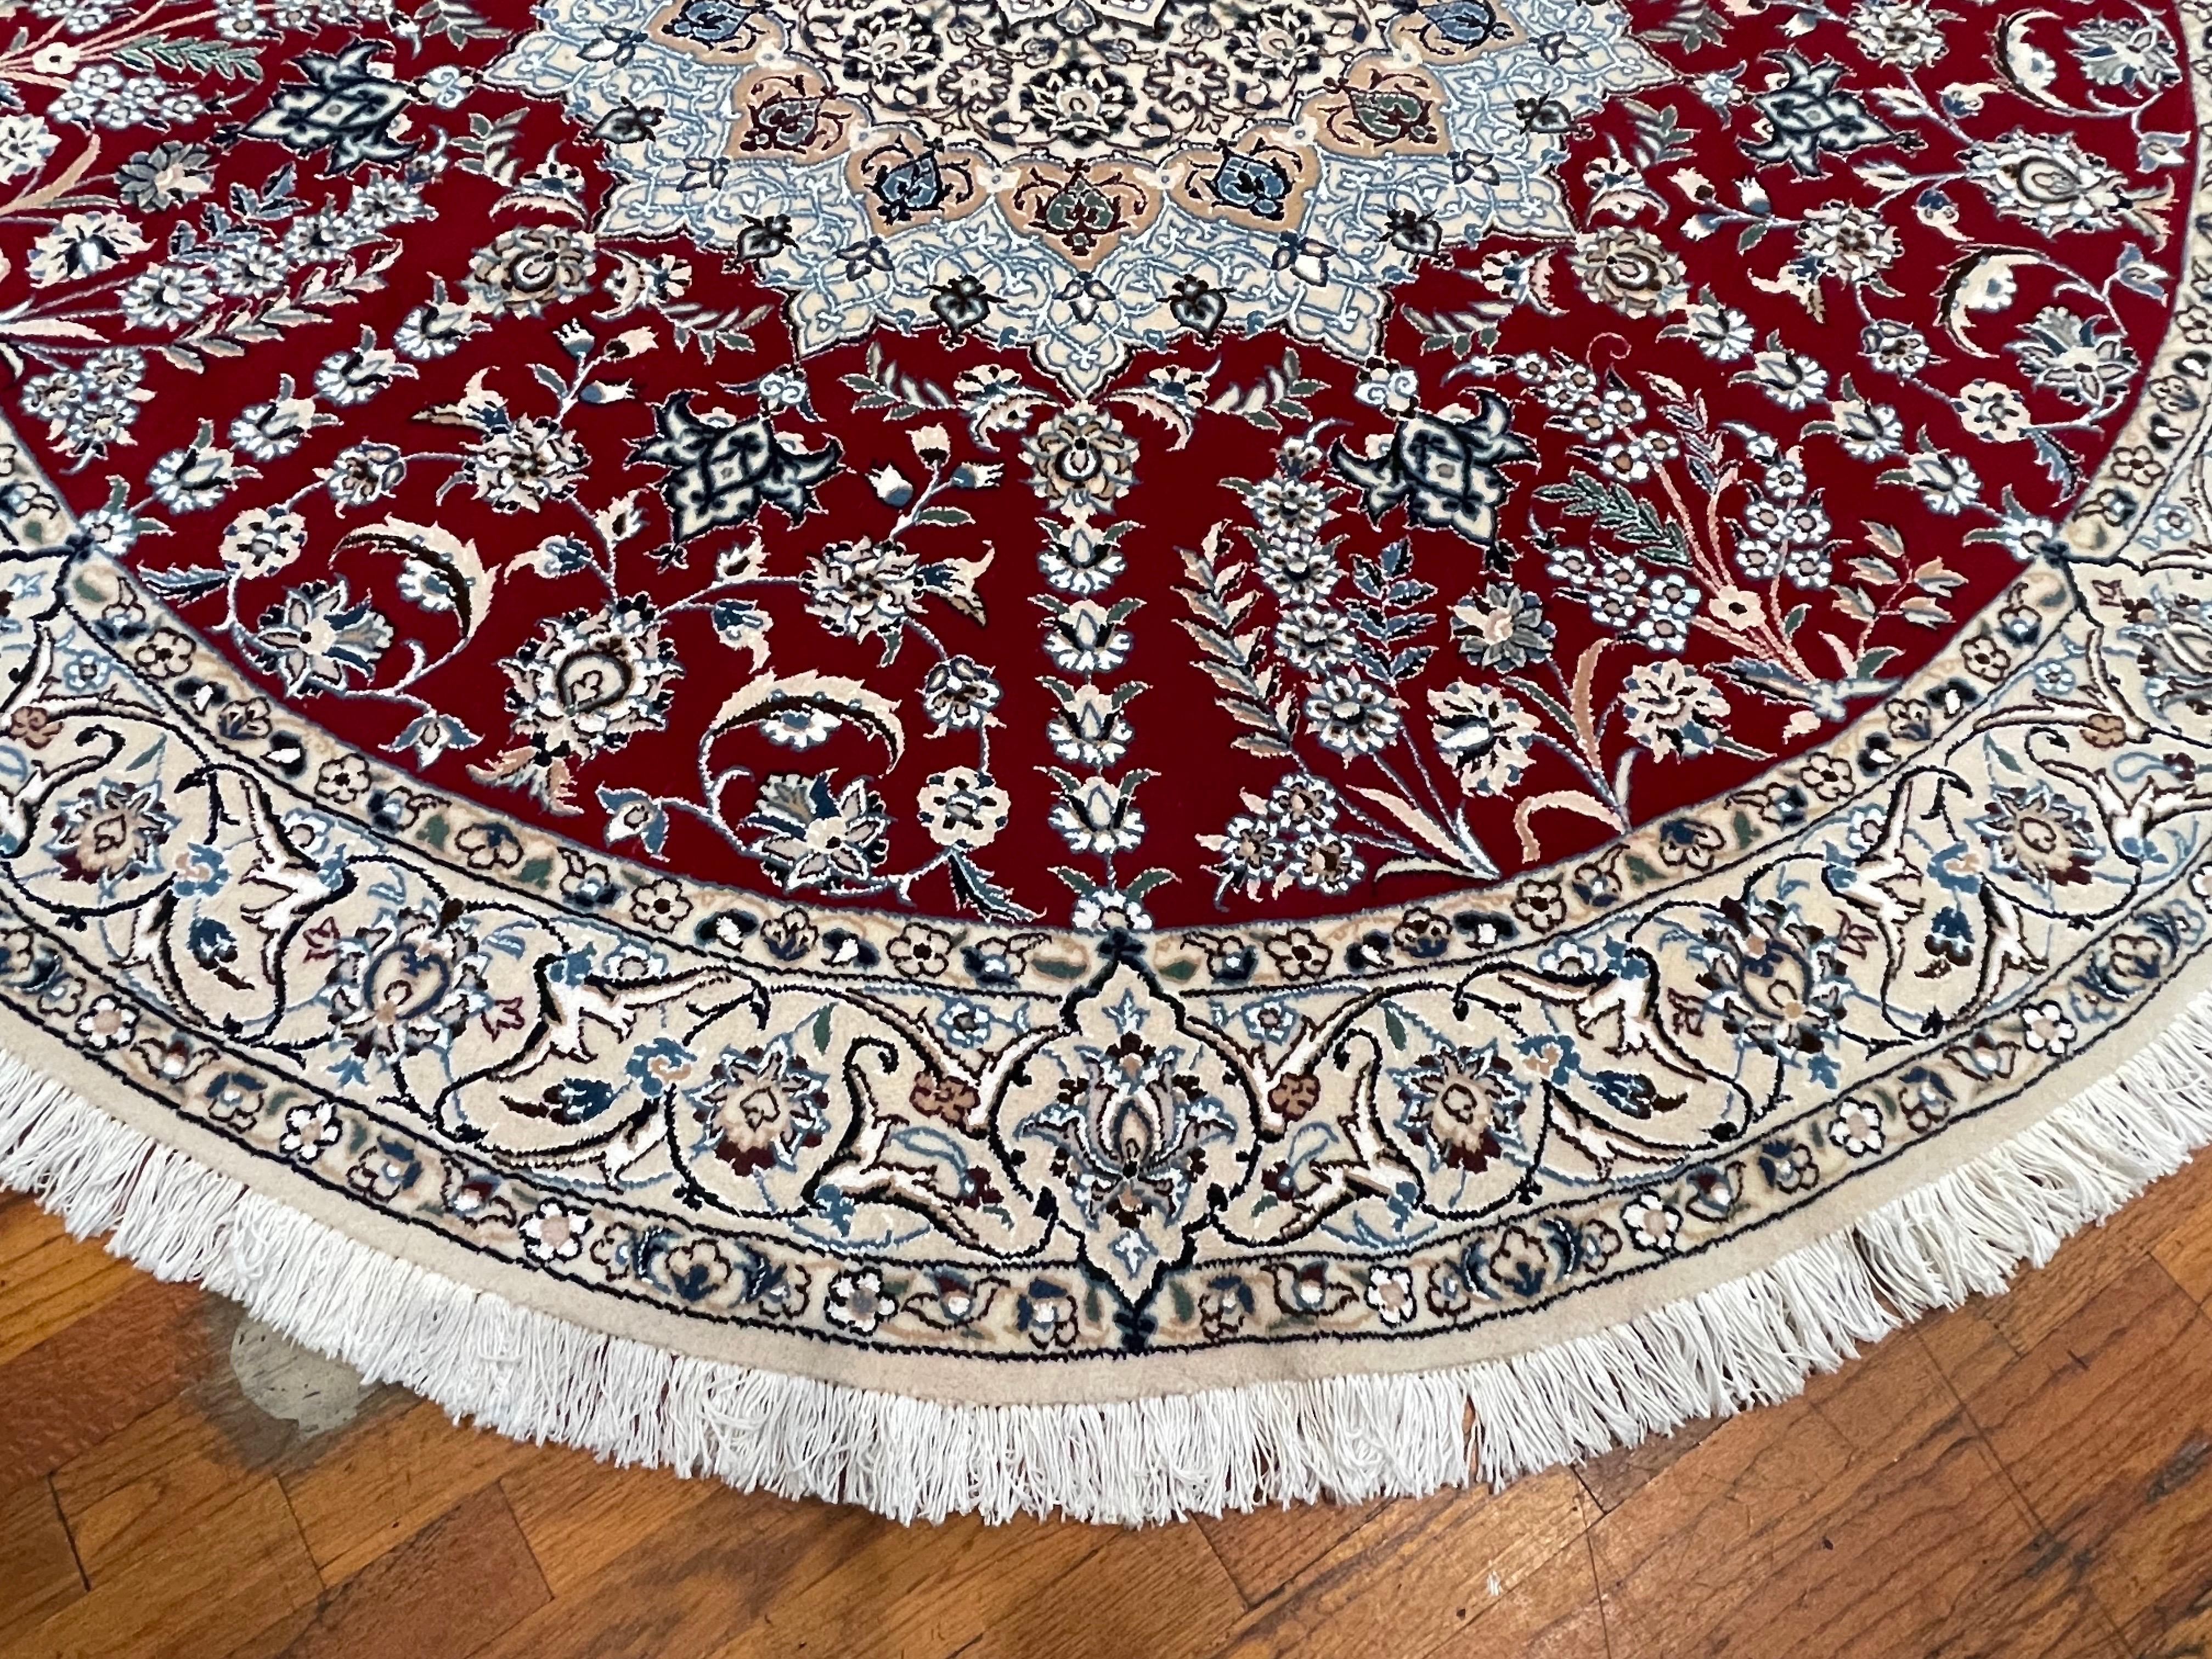 This authentic Persian round hand-made Nain (9 LA) rug has wool and silk pile with cotton foundation. Nain is a city in Iran that is well known for producing fine handmade rug. This rug features a central medallion with floral design which adds an